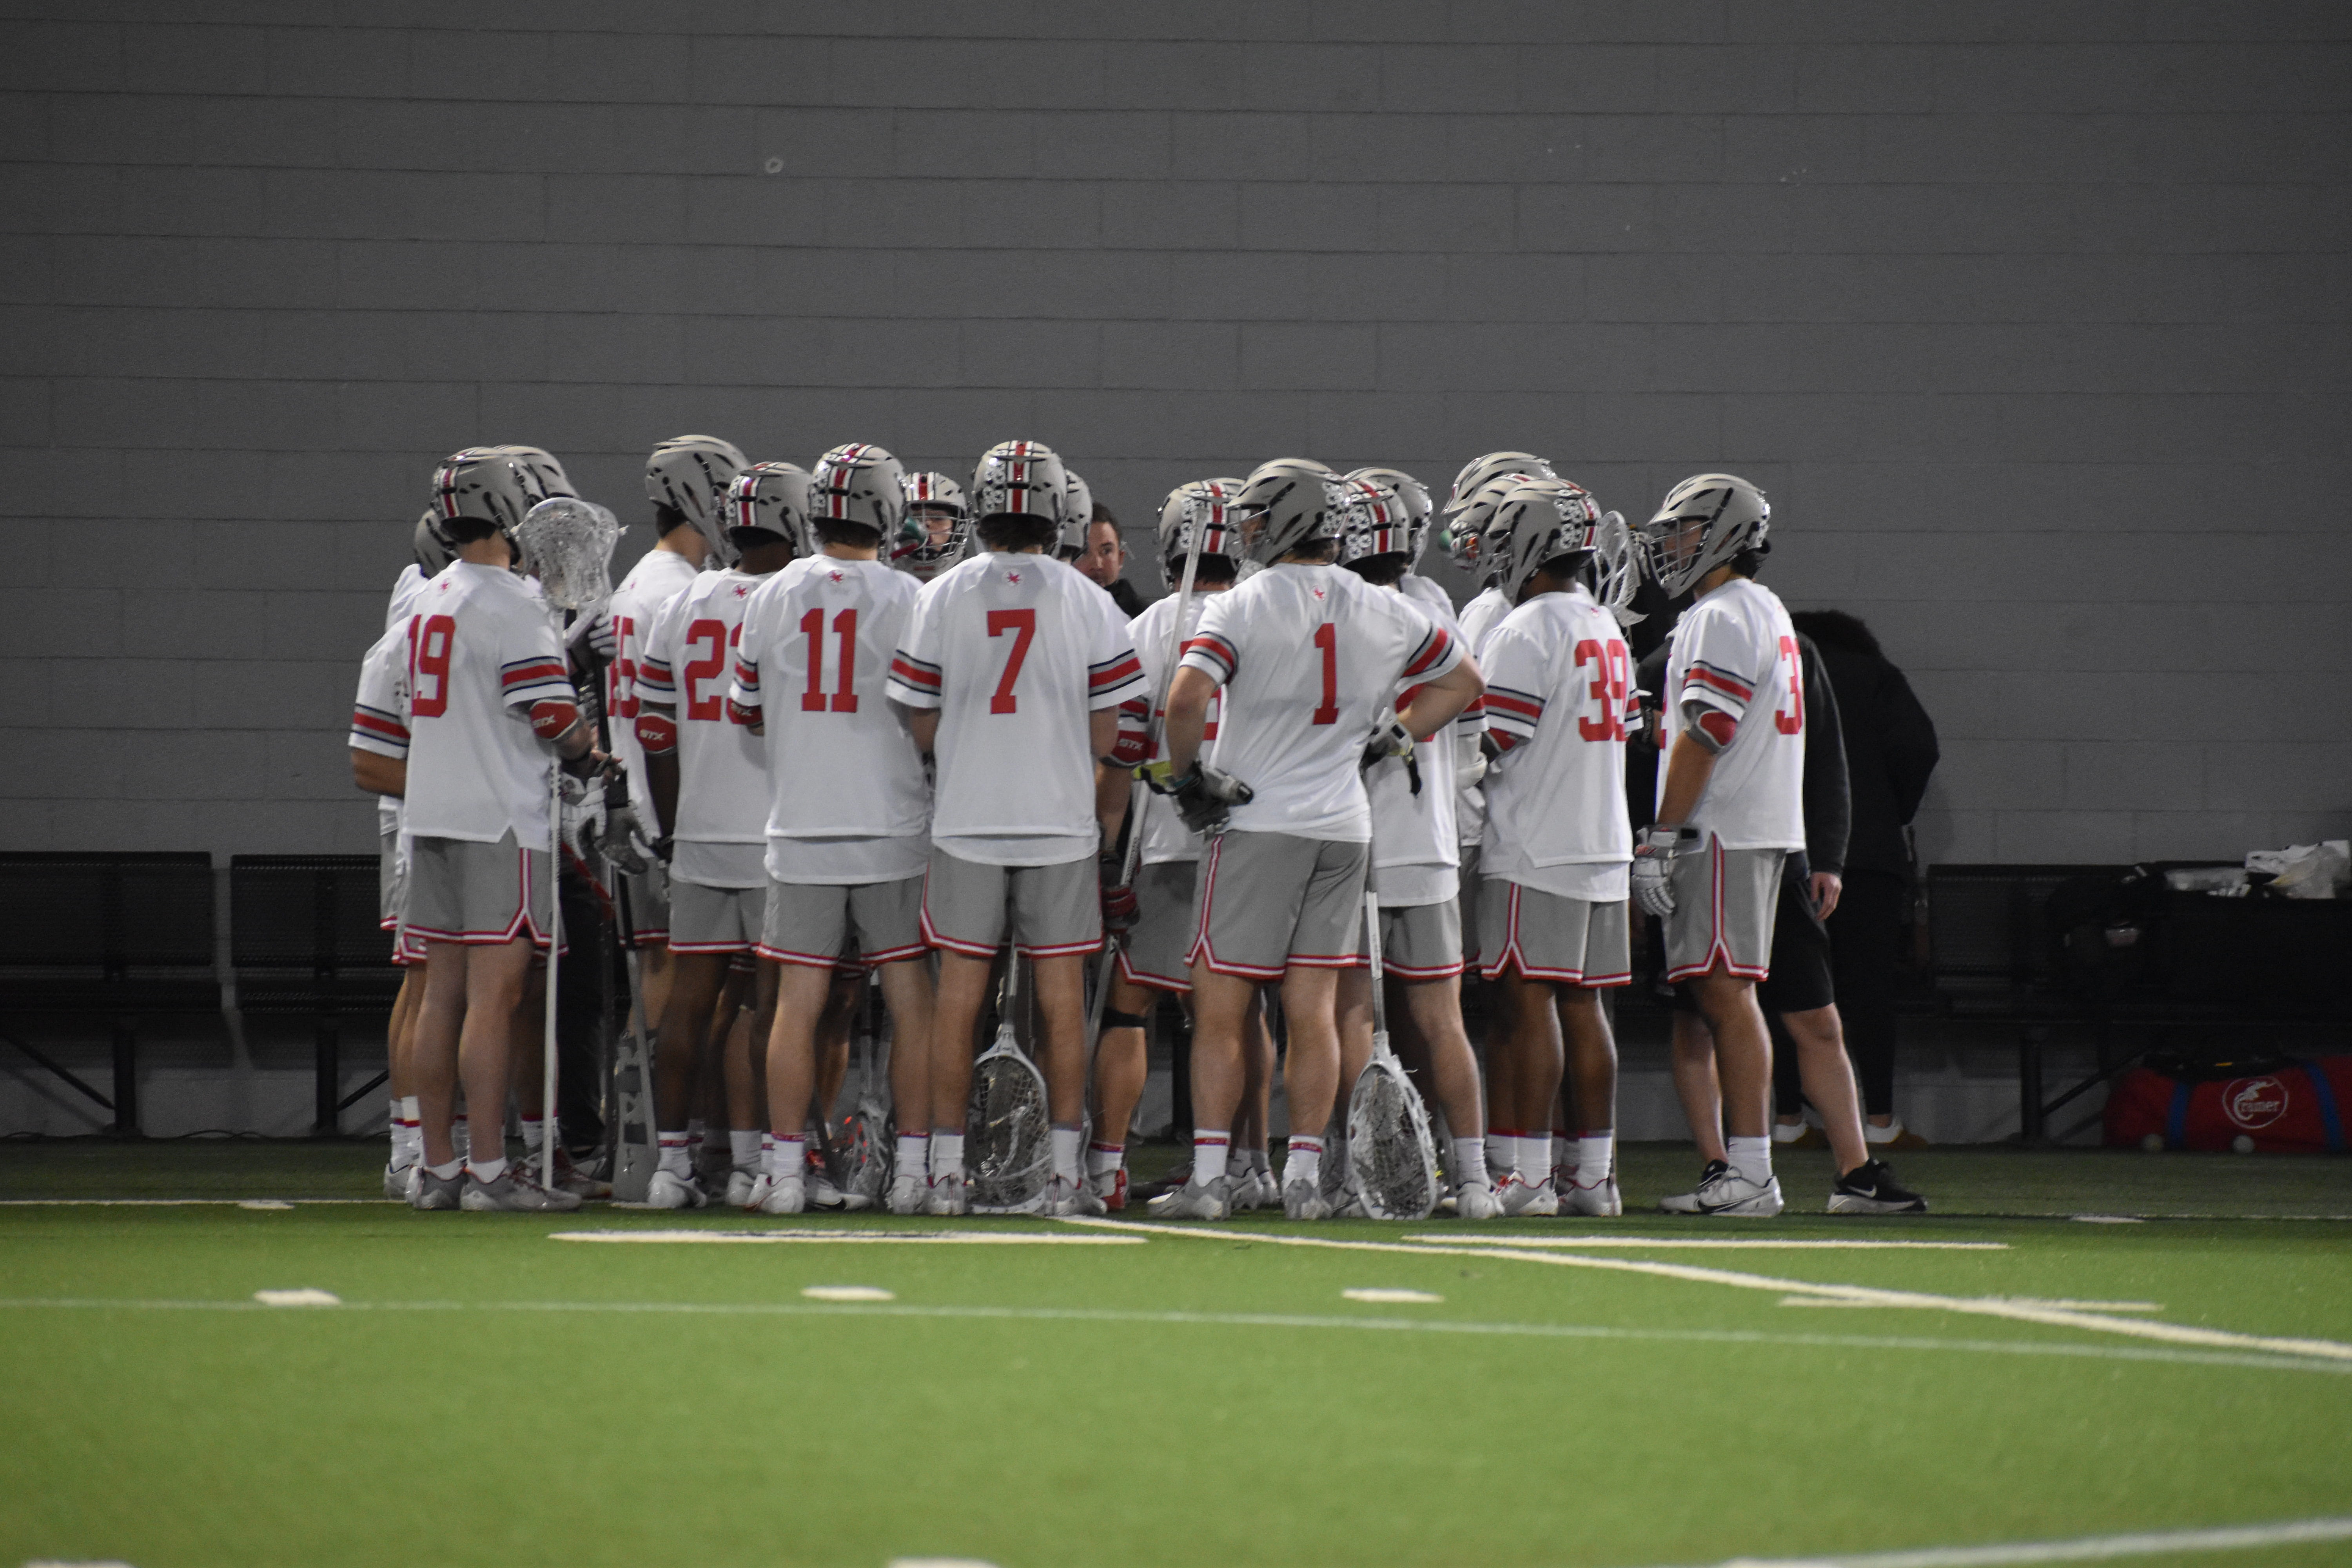 Men’s Lacrosse No. 8 Ohio State looks to stay undefeated against Harvard